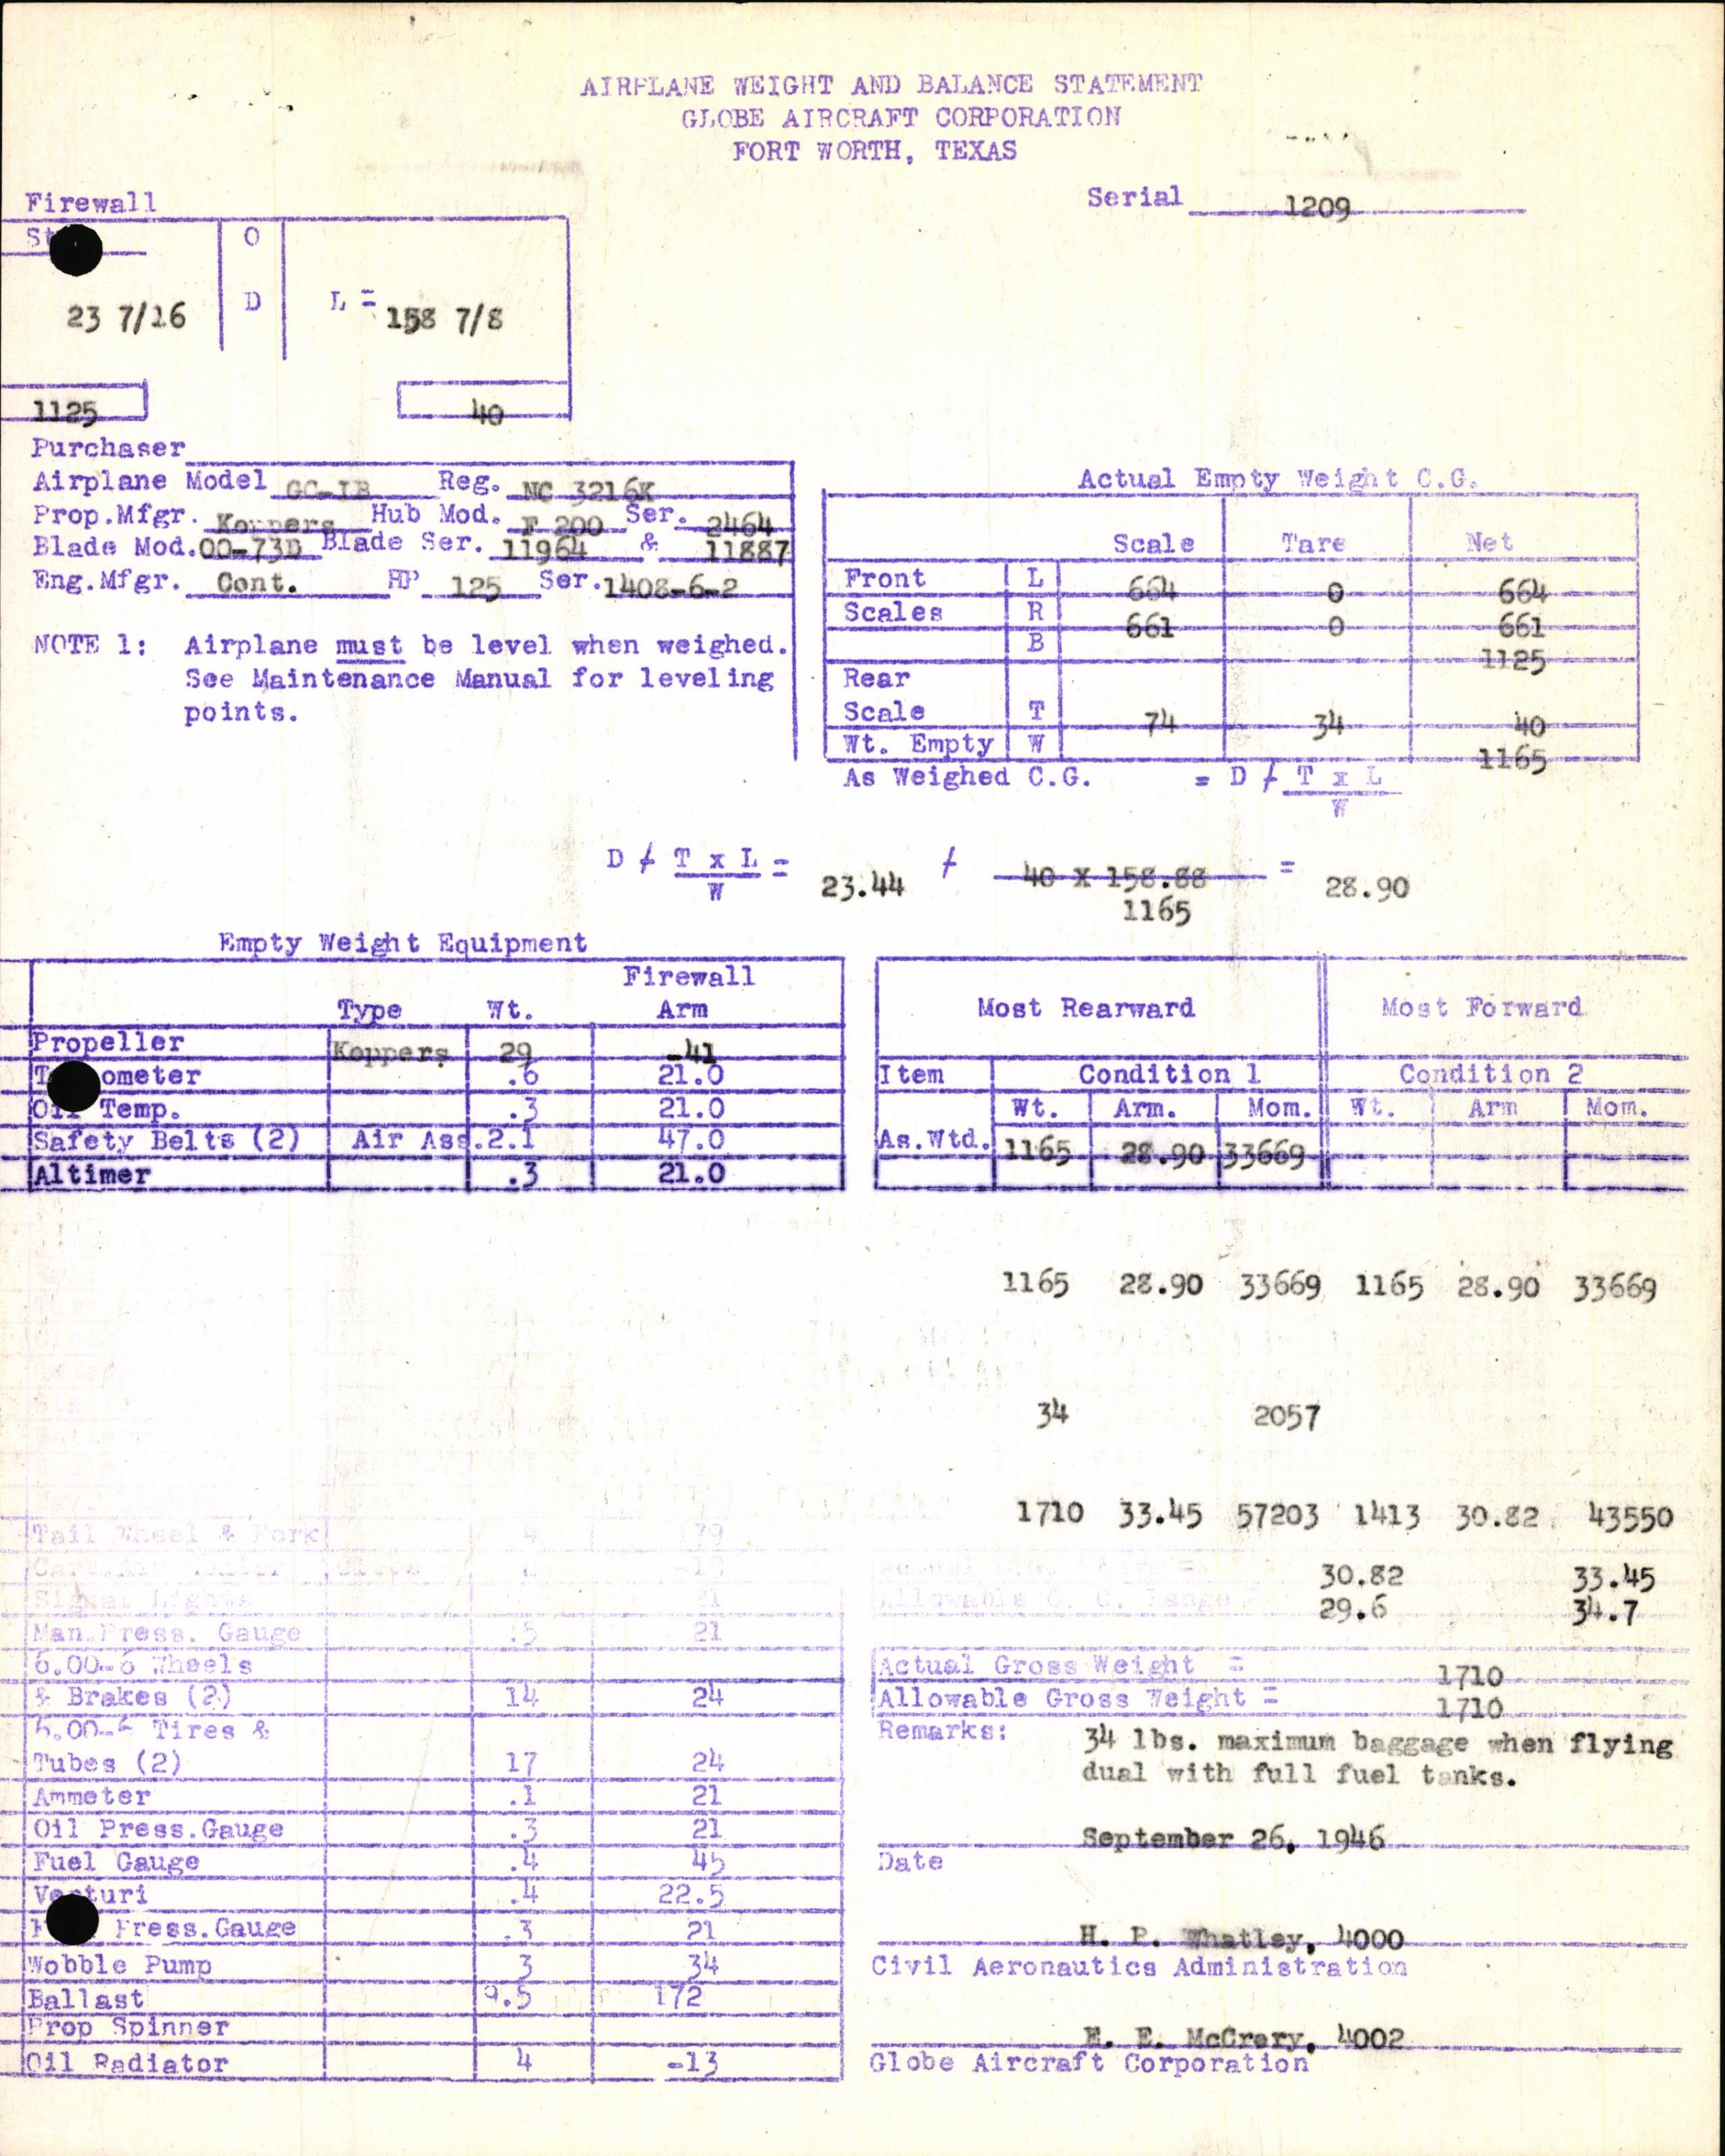 Sample page 7 from AirCorps Library document: Technical Information for Serial Number 1209